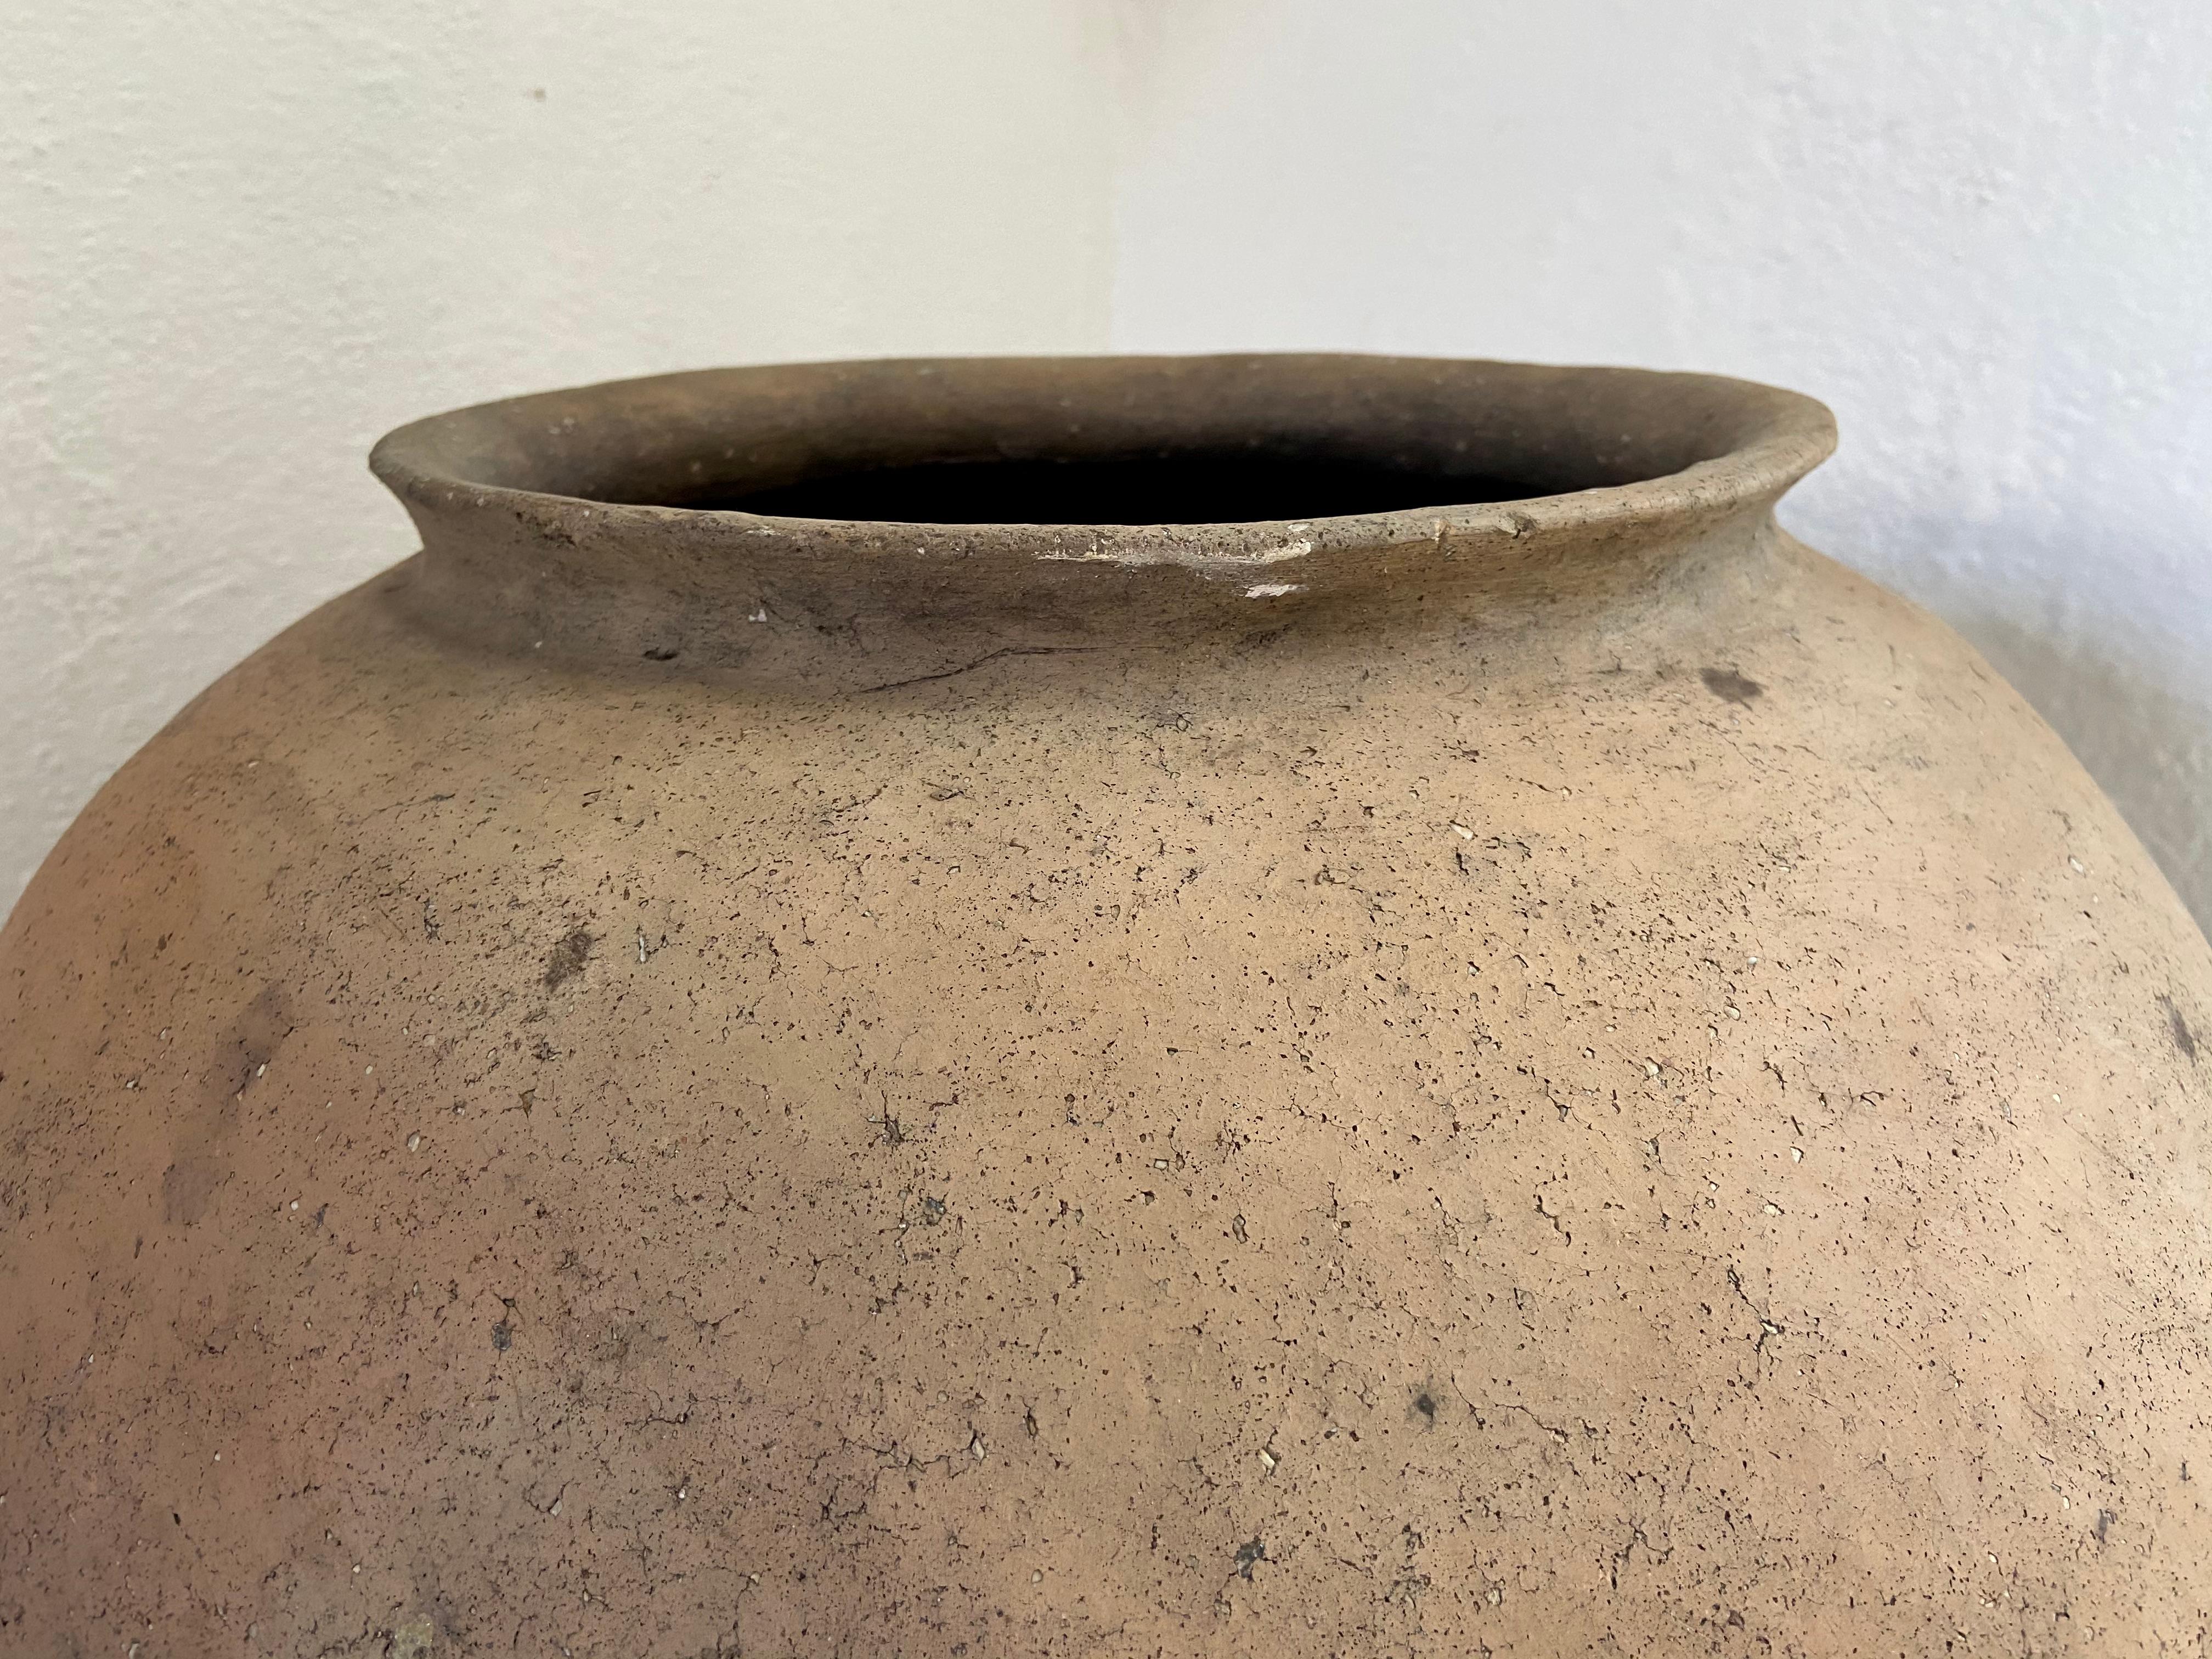 Terracotta water pot from the northern highlands of Puebla, Mexico. Both handles are intact and the pot is structurally solid.